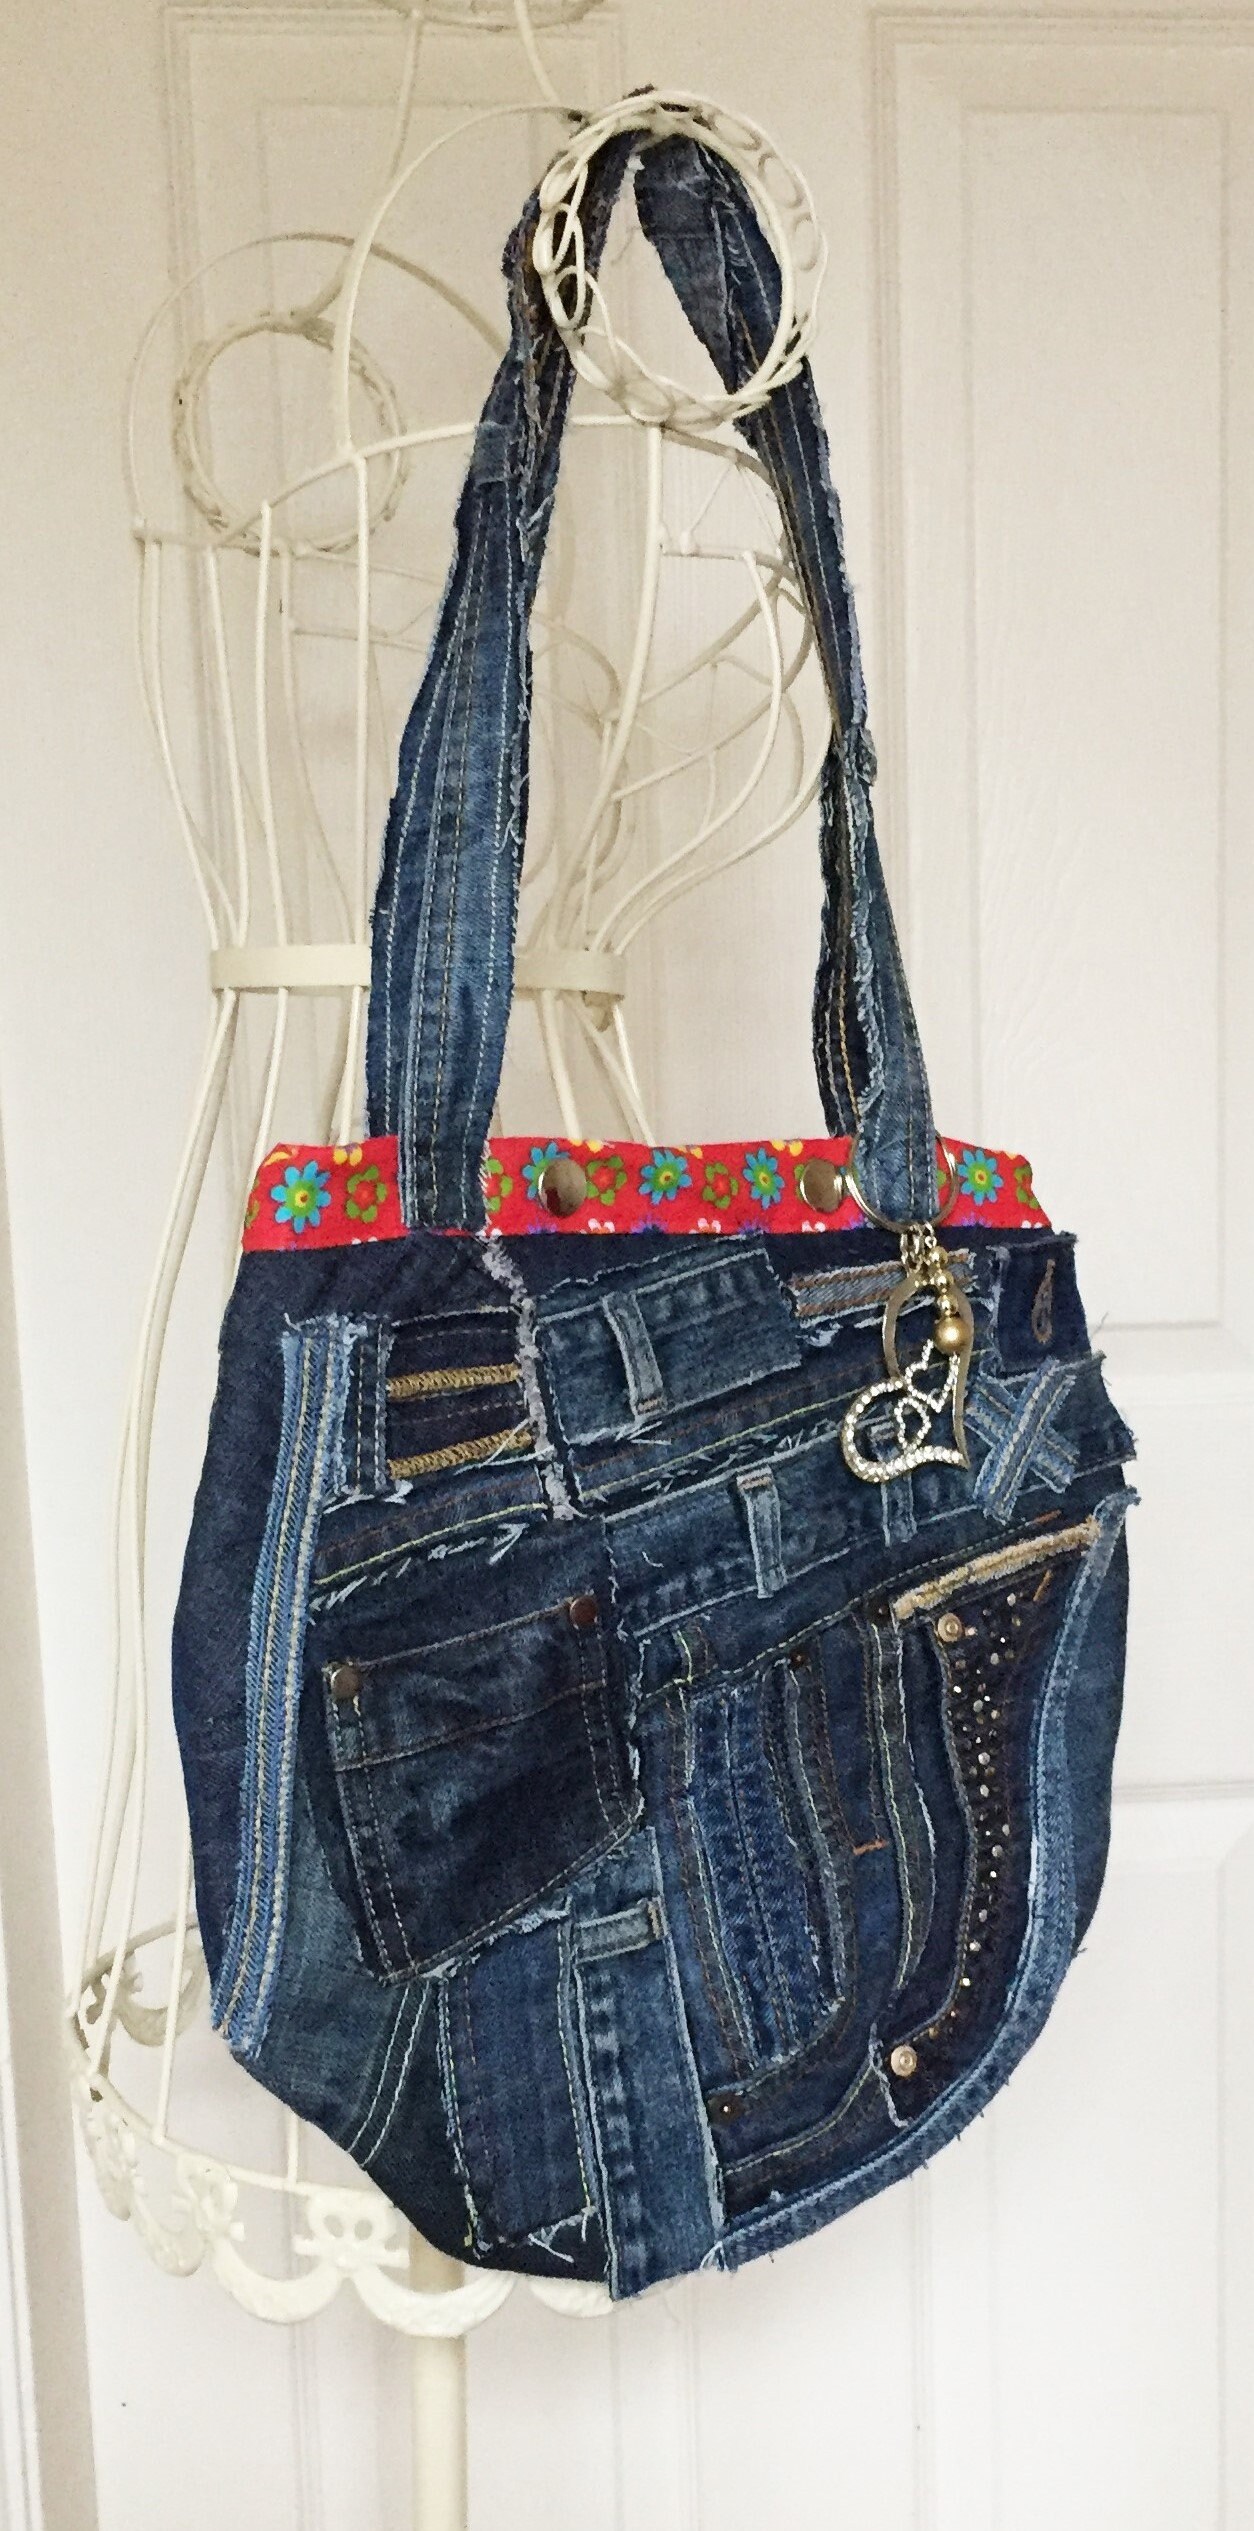 Patchwork Denim Handbag Recycled Jeans Tote Upcycled | Etsy